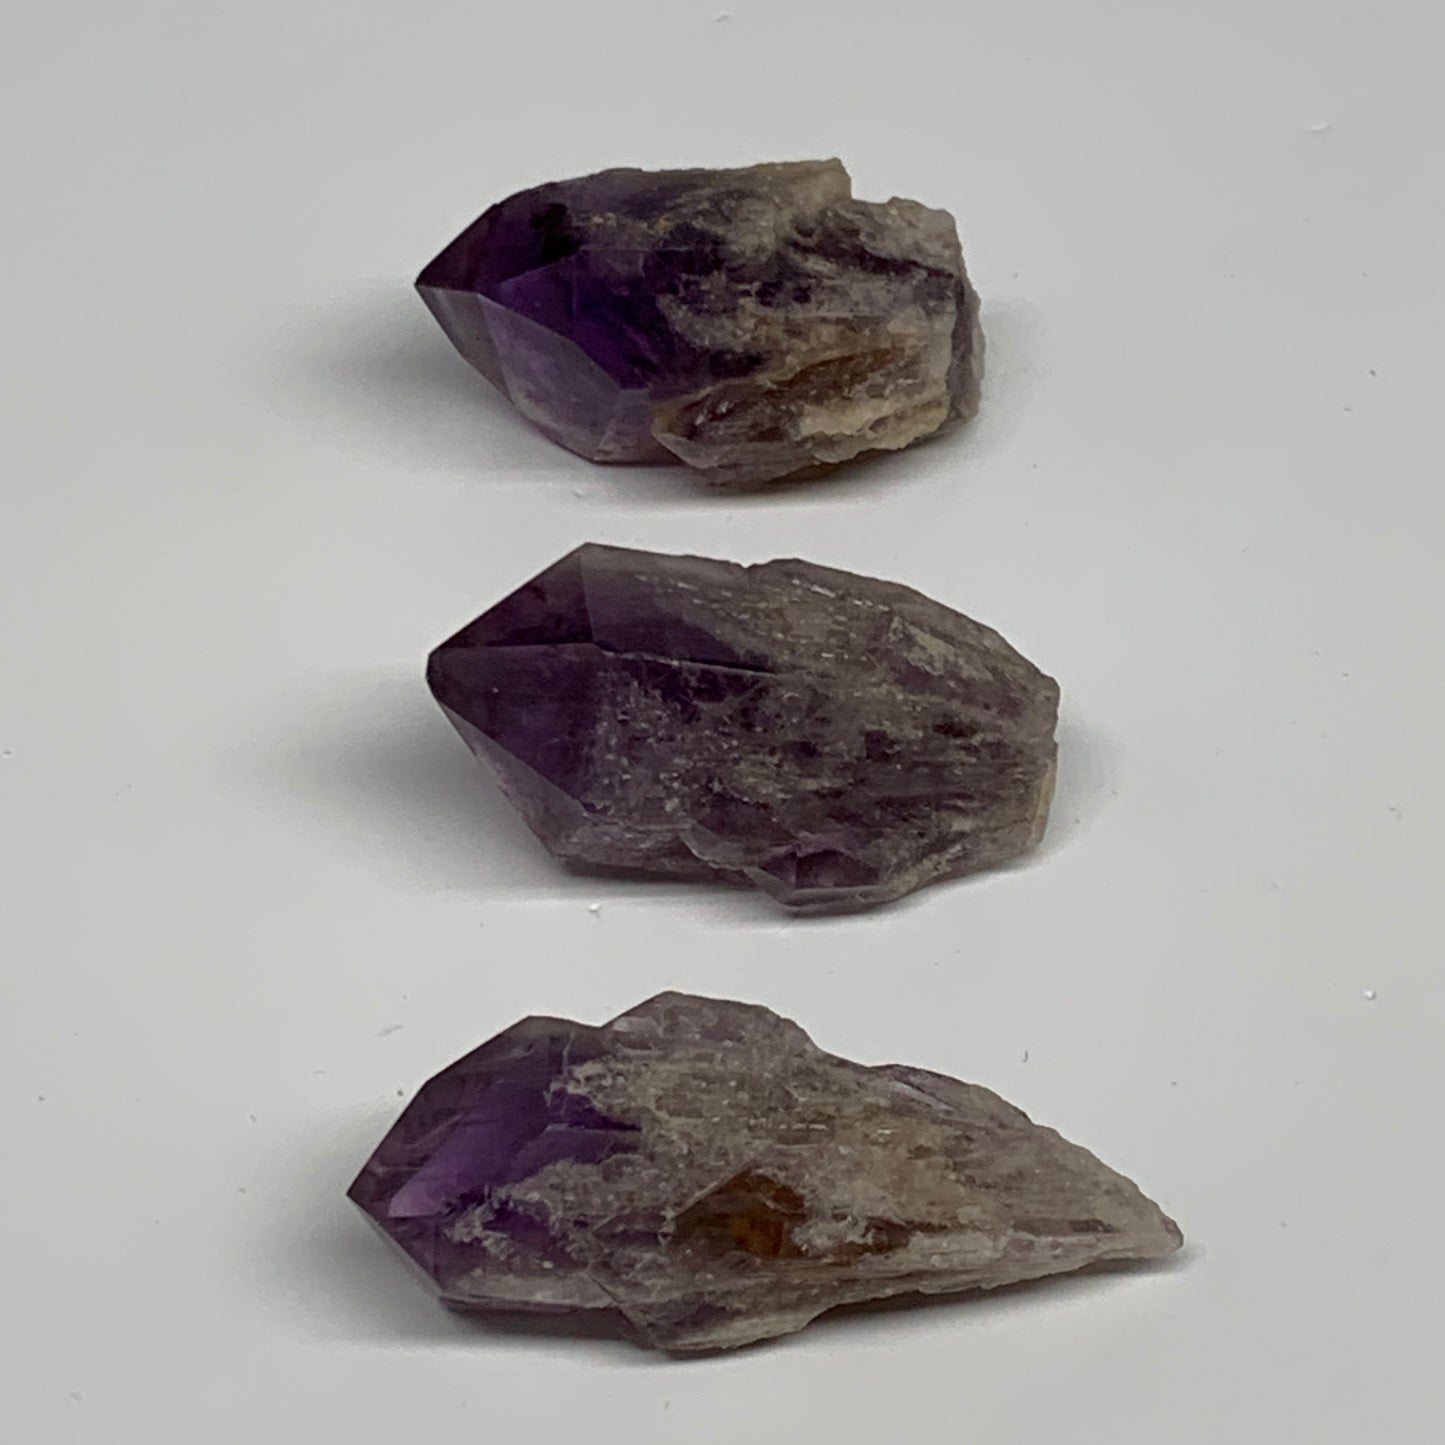 120g, 2" - 2.4", 3pcs, Amethyst Point Polished Rough lower part, B32390